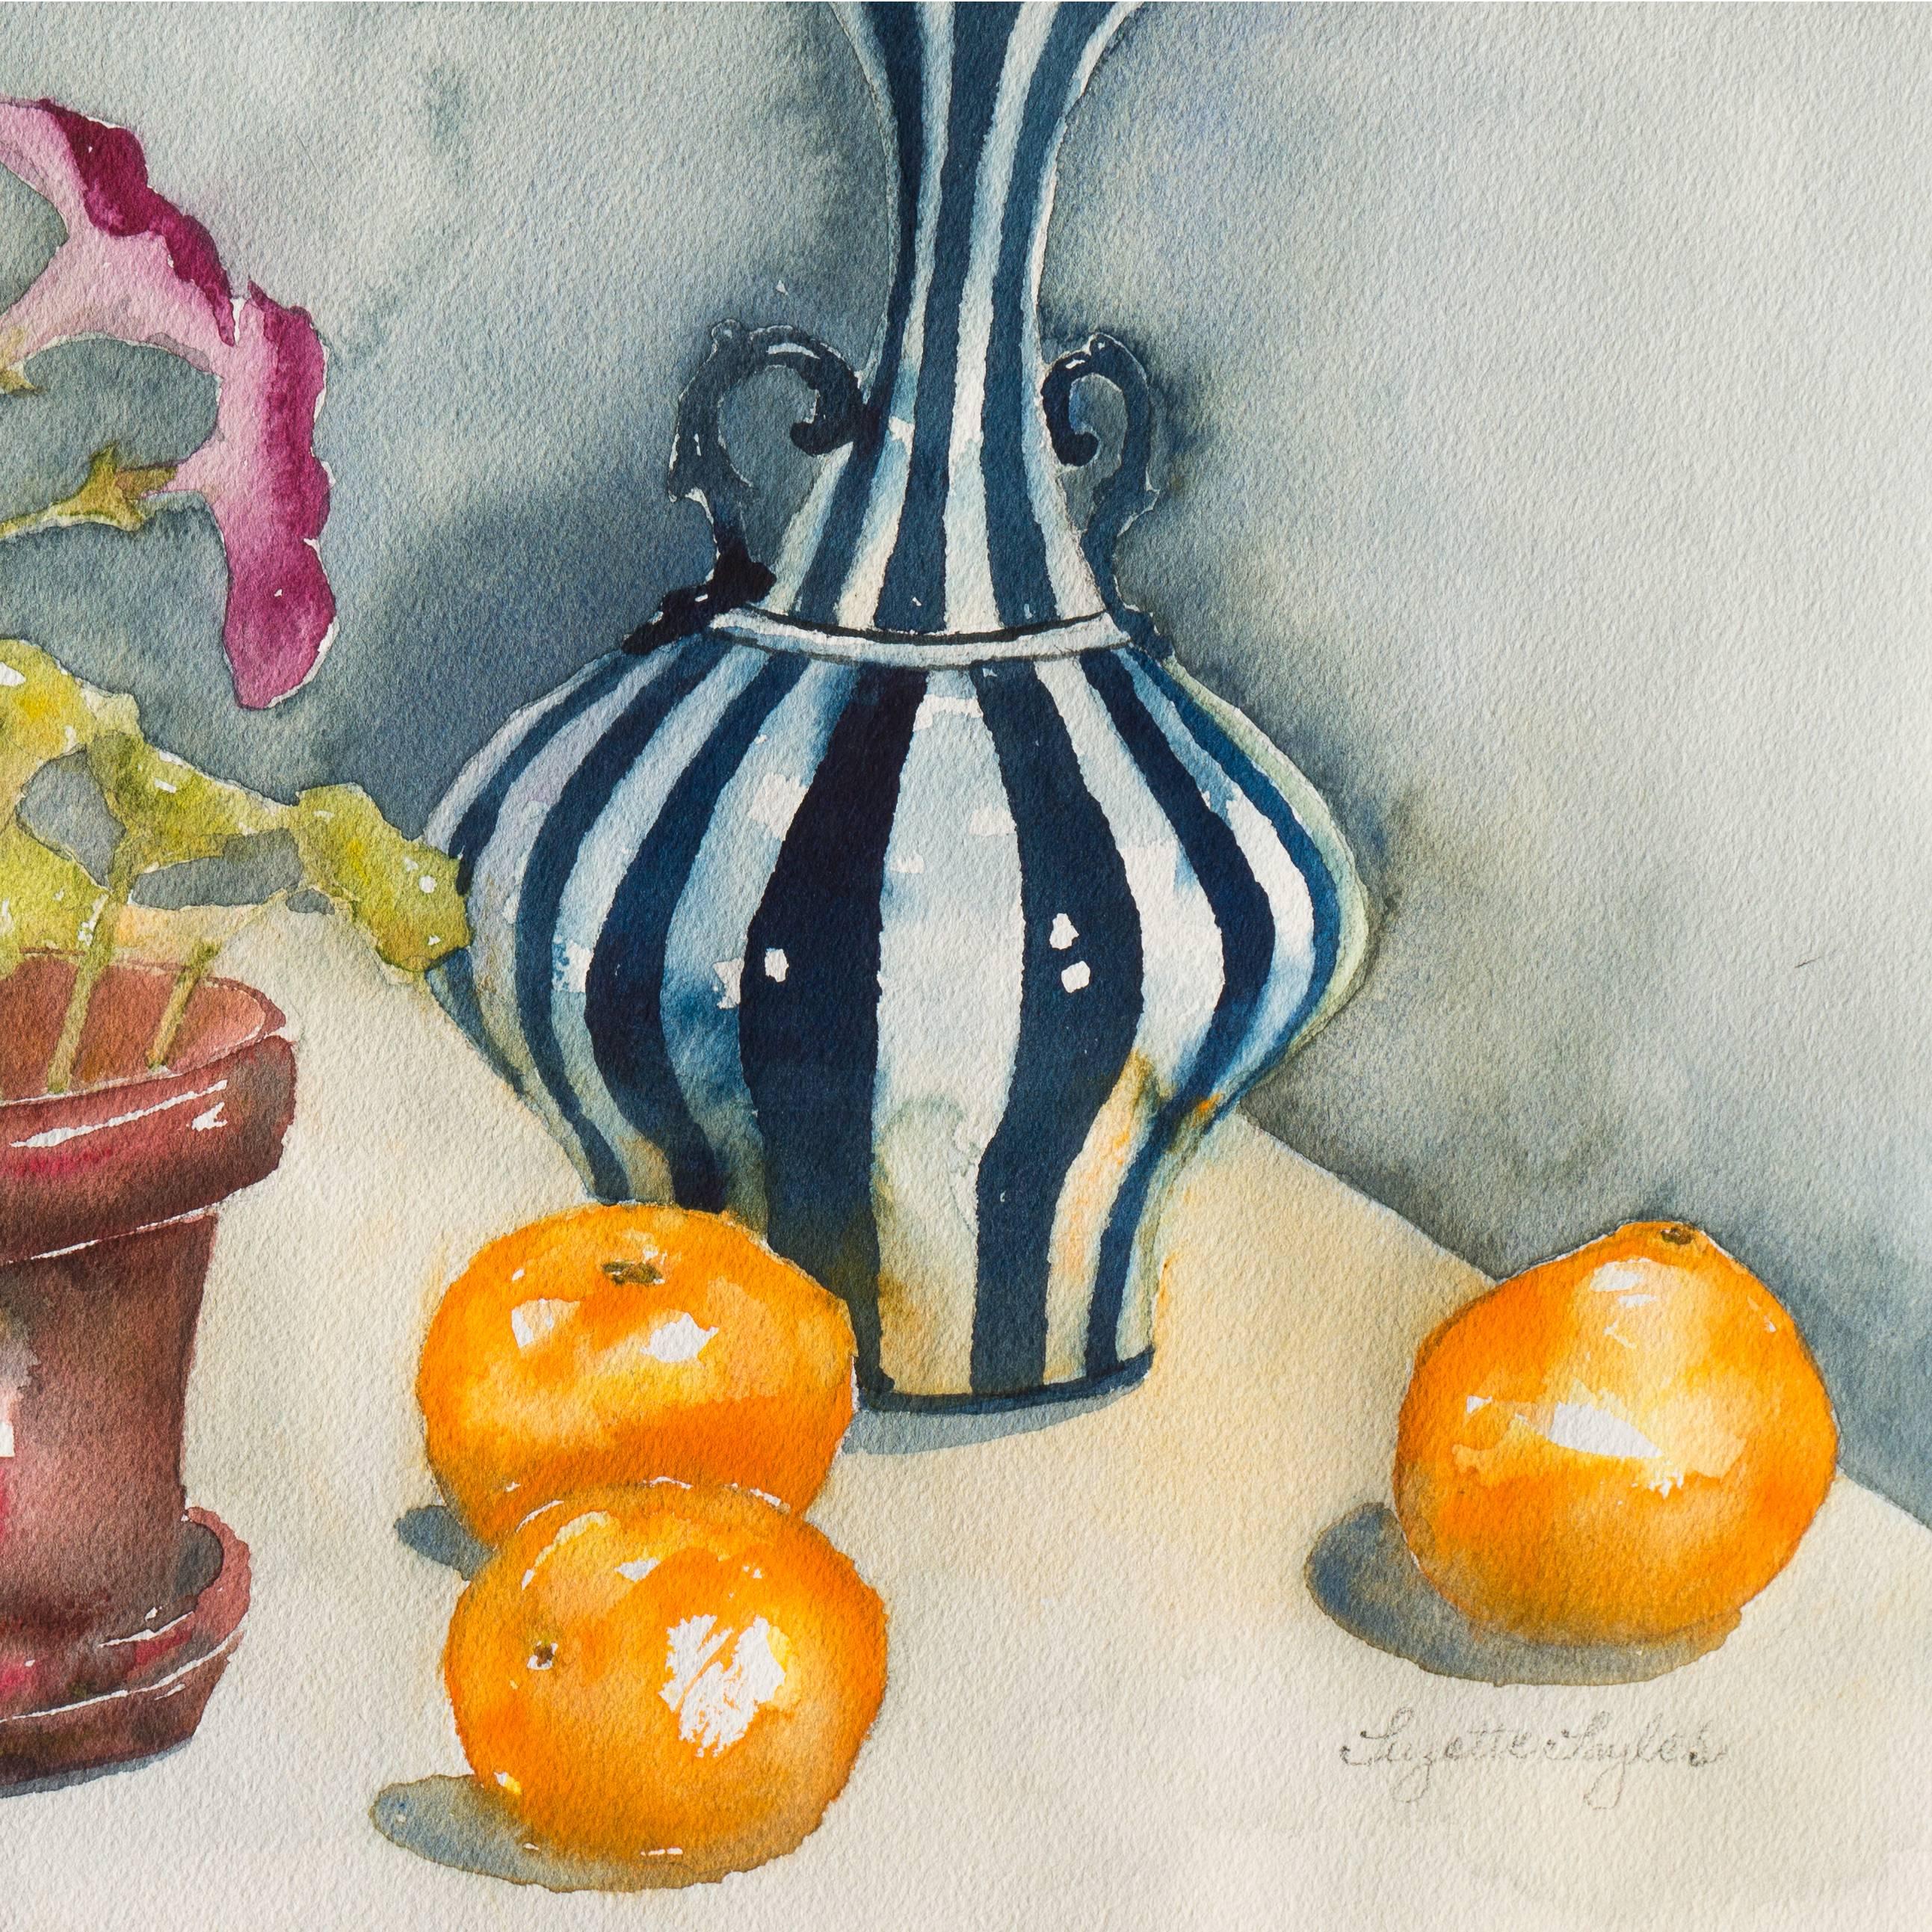 Signed lower right, 'Suzette Sayles' and painted circa 1955.

An elegant watercolor still-life showing tangerines informally arranged on a table-top beside purple pansies and a Venetian glass vase by this listed Carmel artist.

